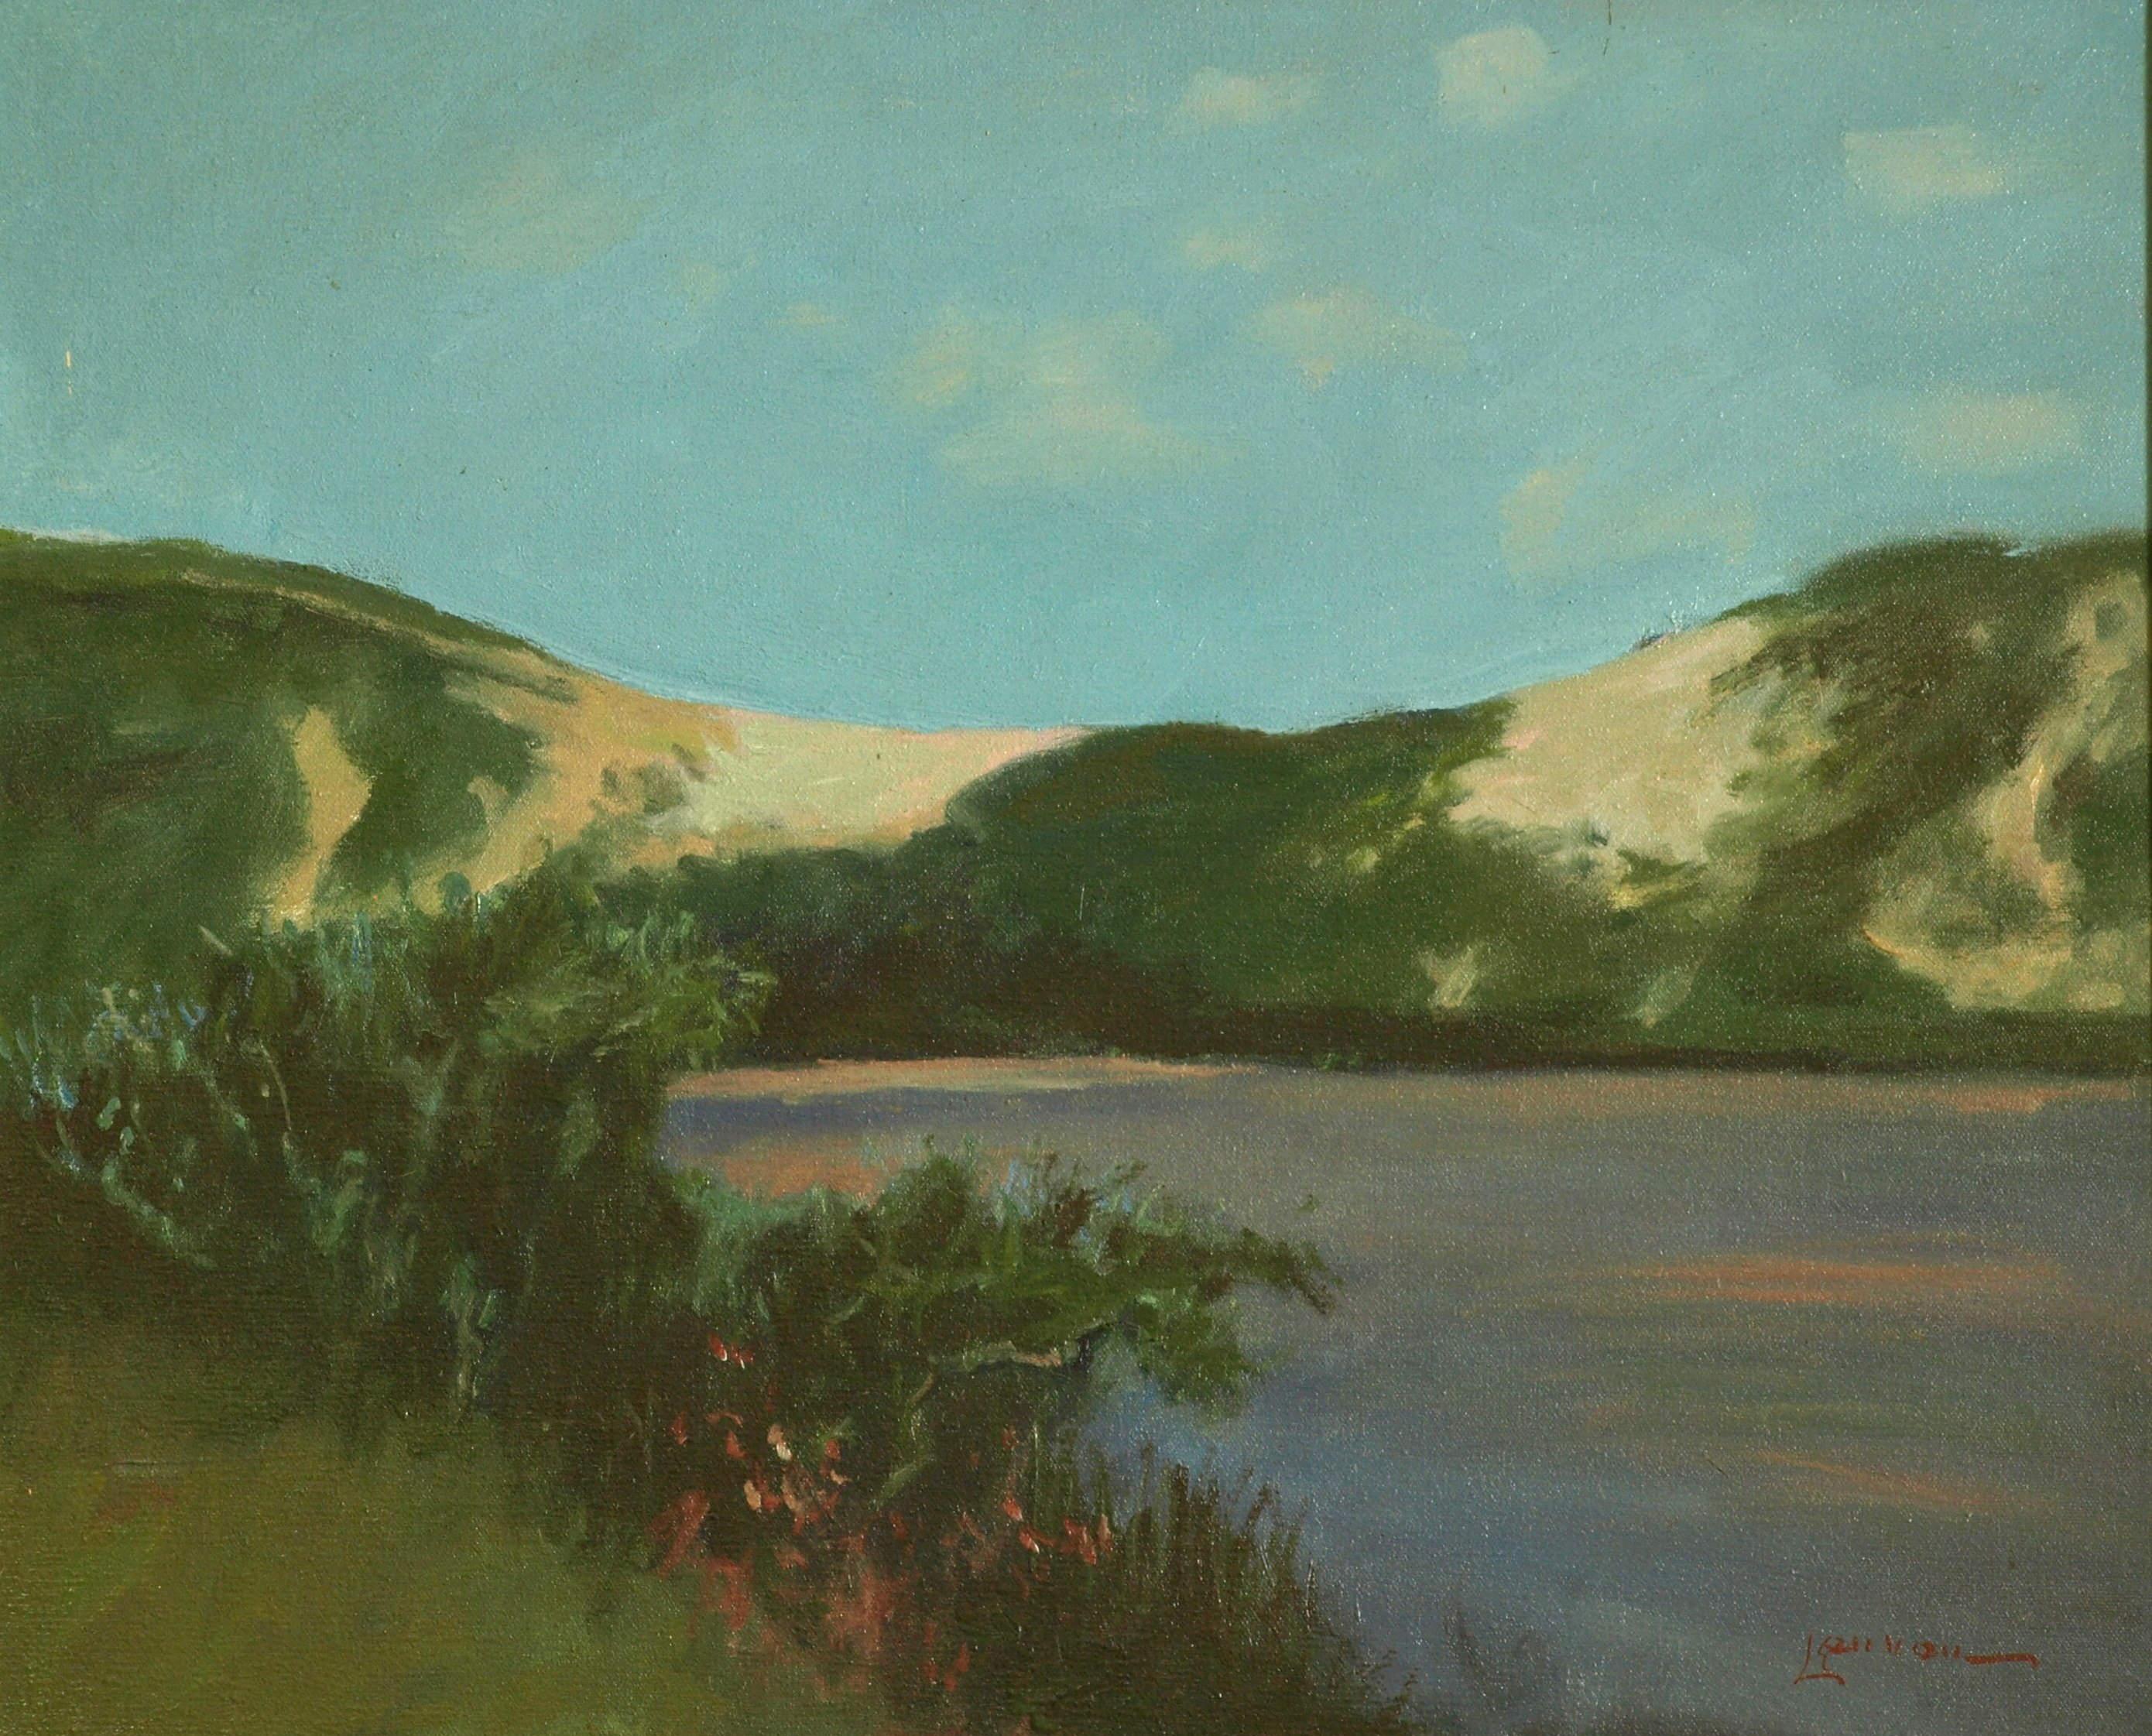 Sand Dunes - Provincetown, Oil on Canvas, 20 x 24 Inches, by Bernard Lennon, $875